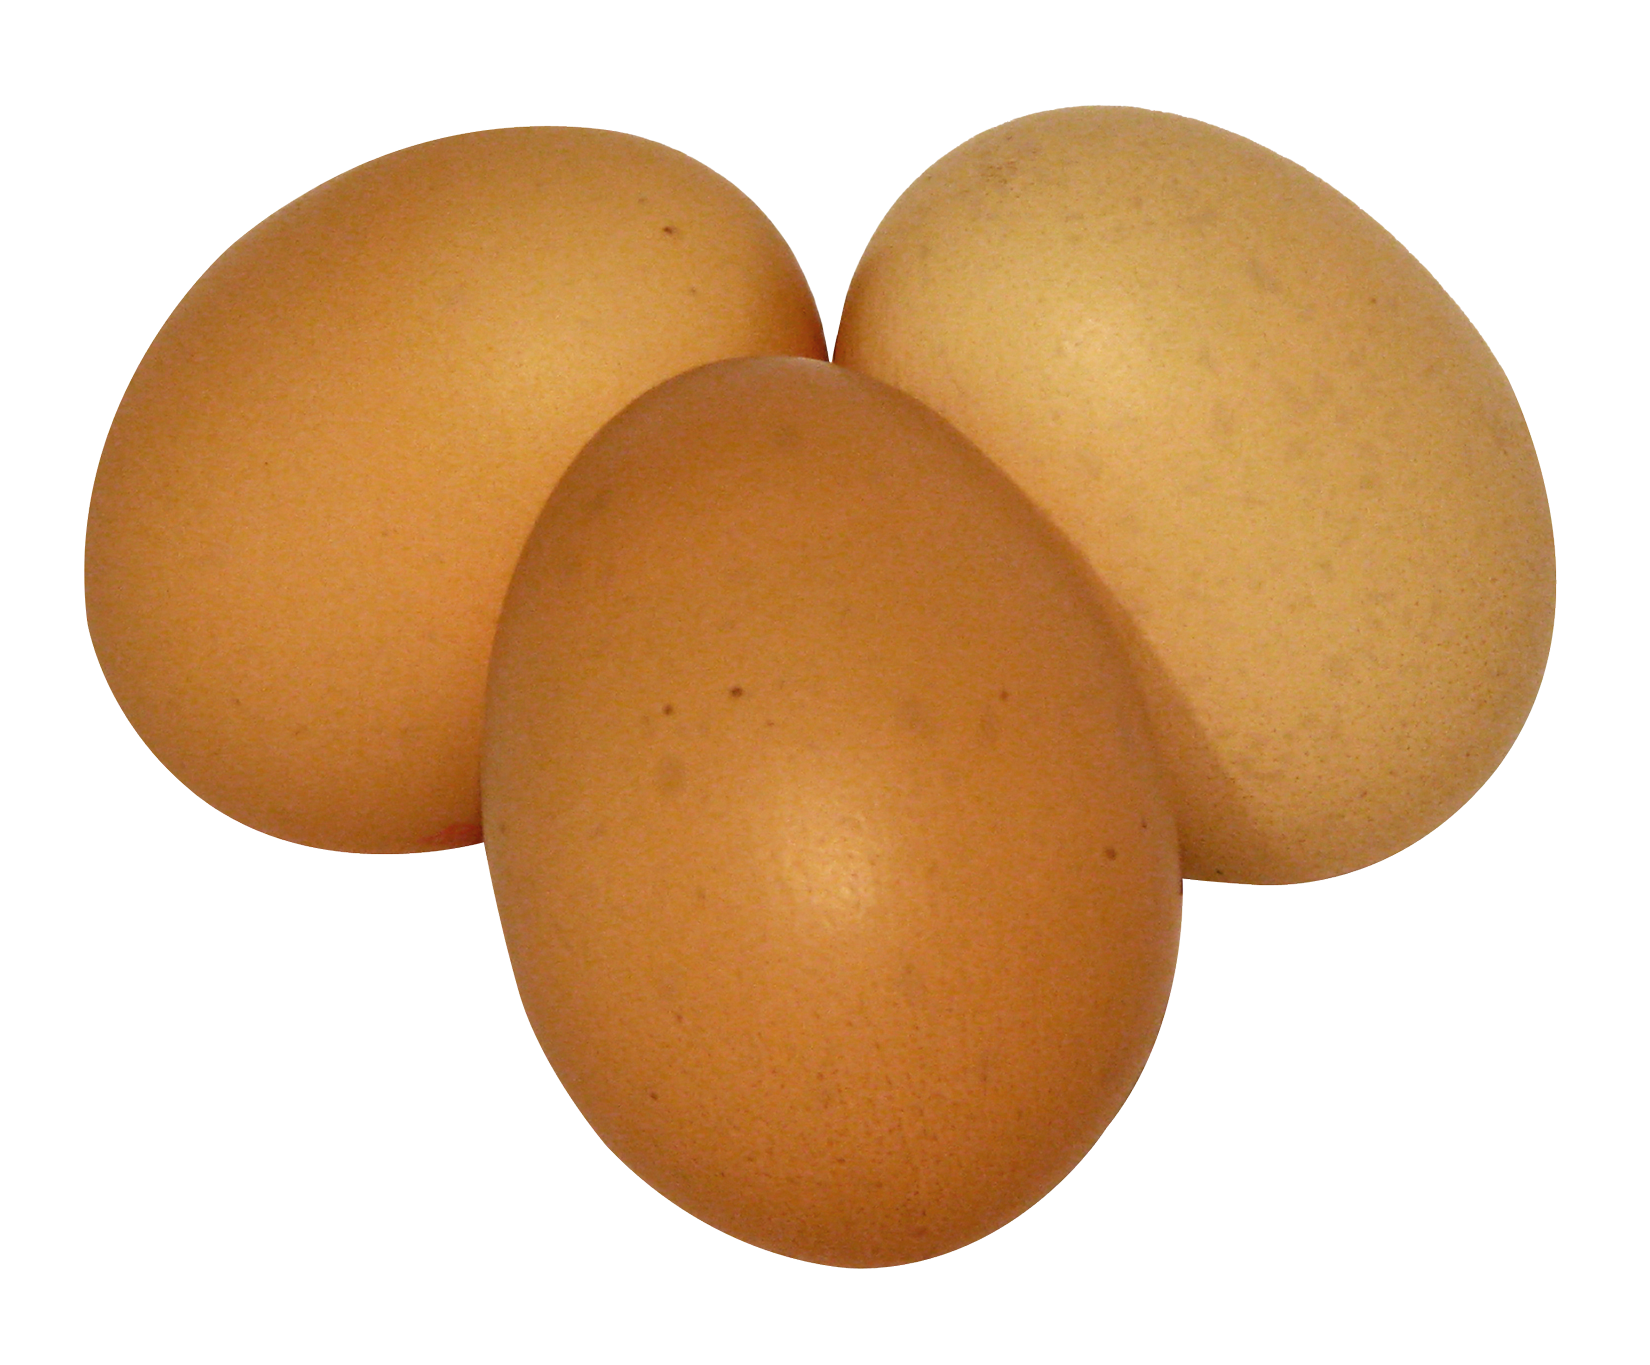 Download Eggs PNG Image for Free